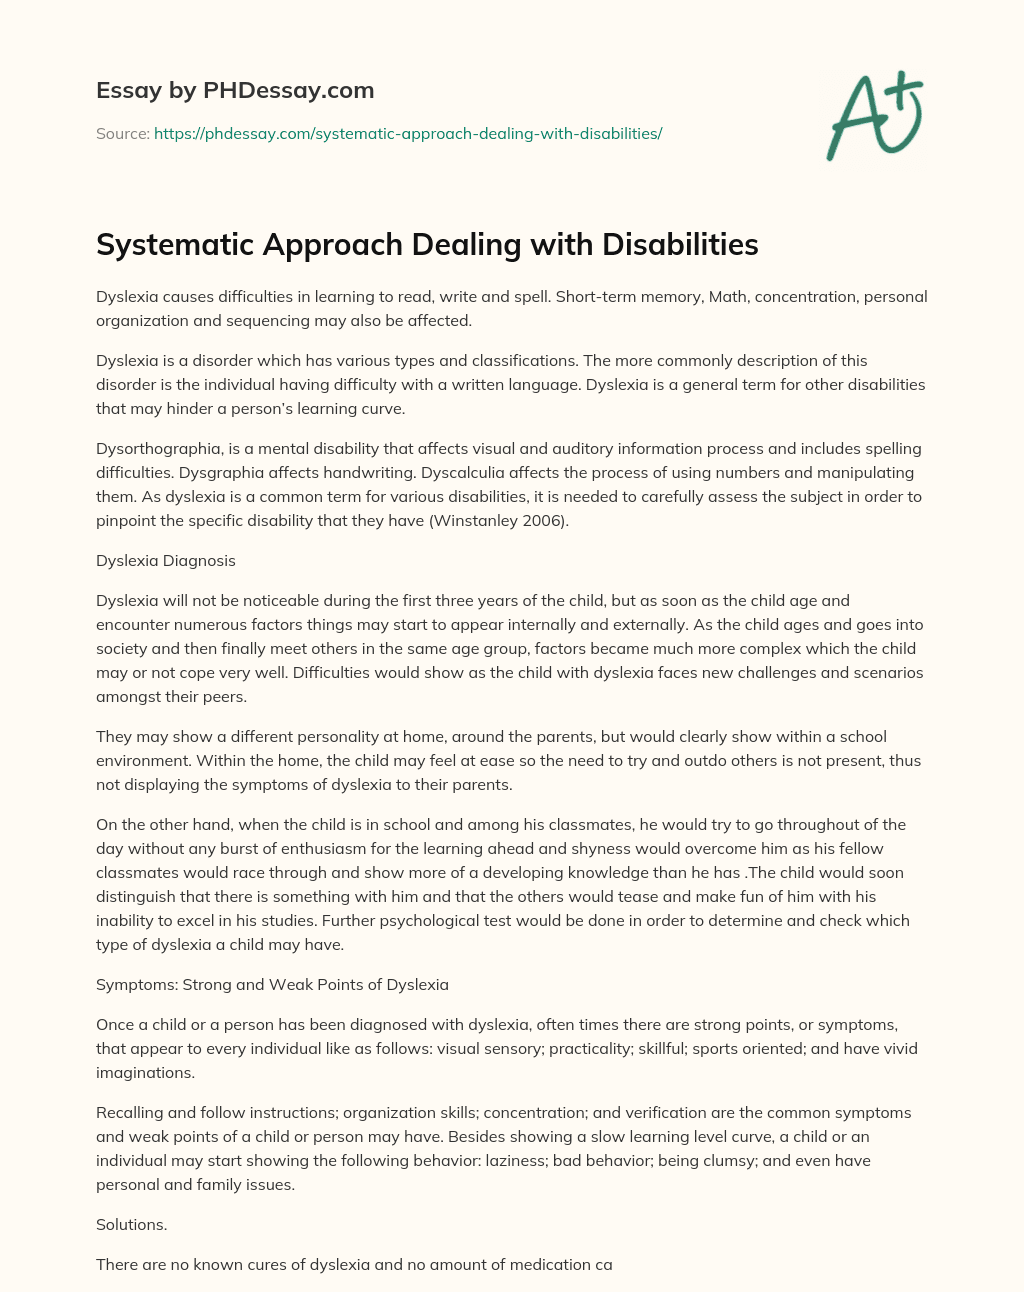 Systematic Approach Dealing with Disabilities essay